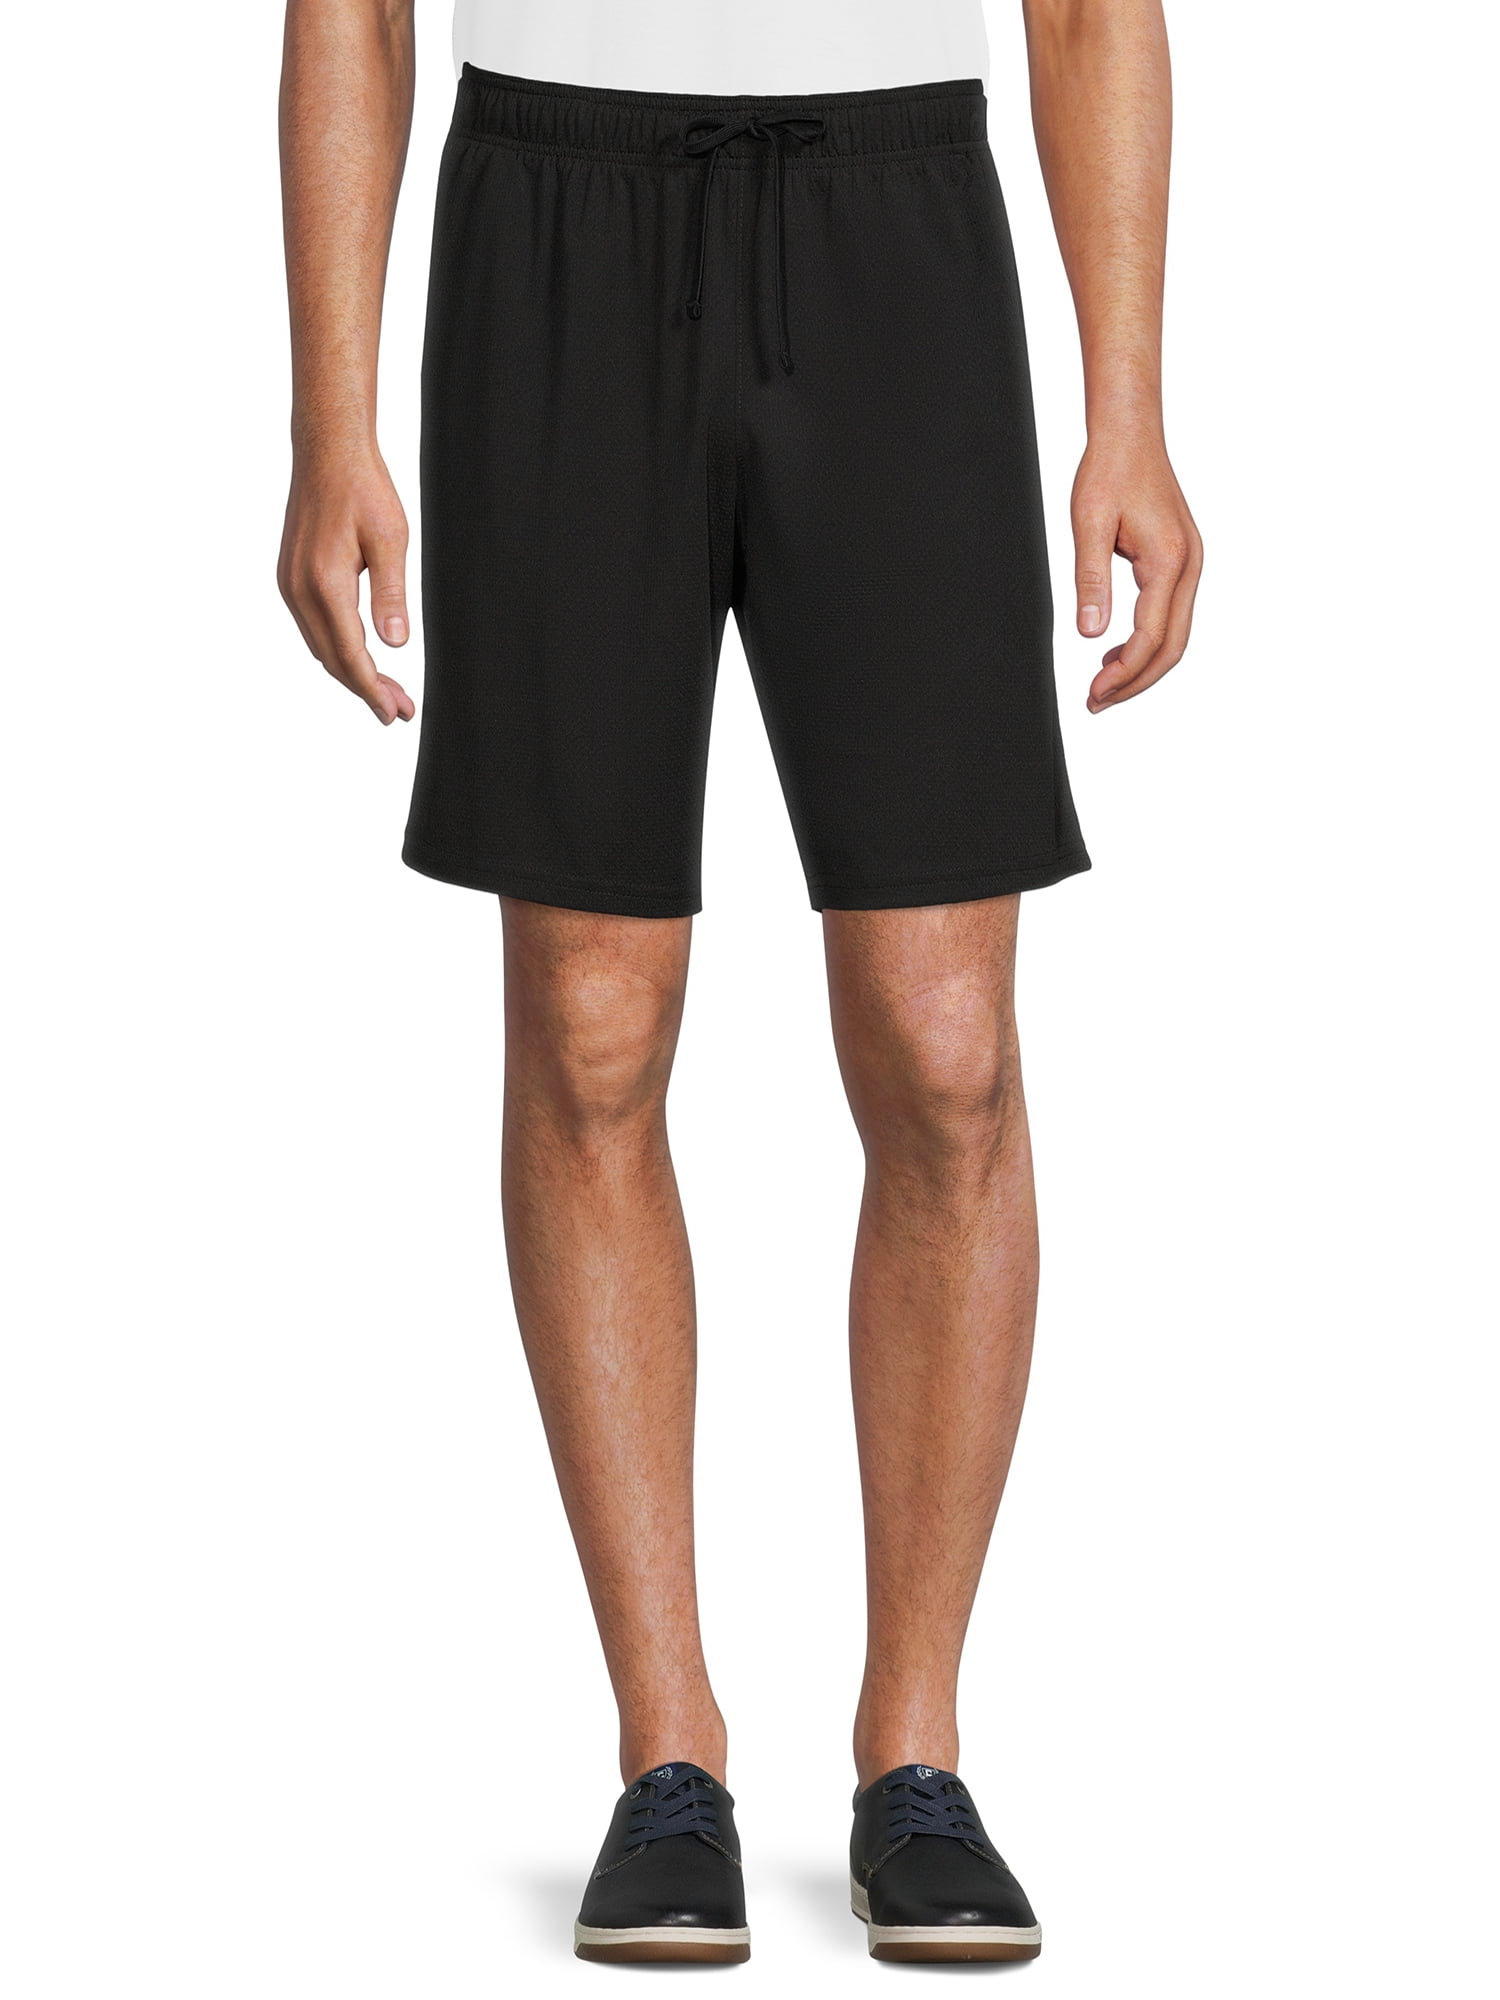 Buy trail shorts Online in Morocco at Low Prices at desertcart